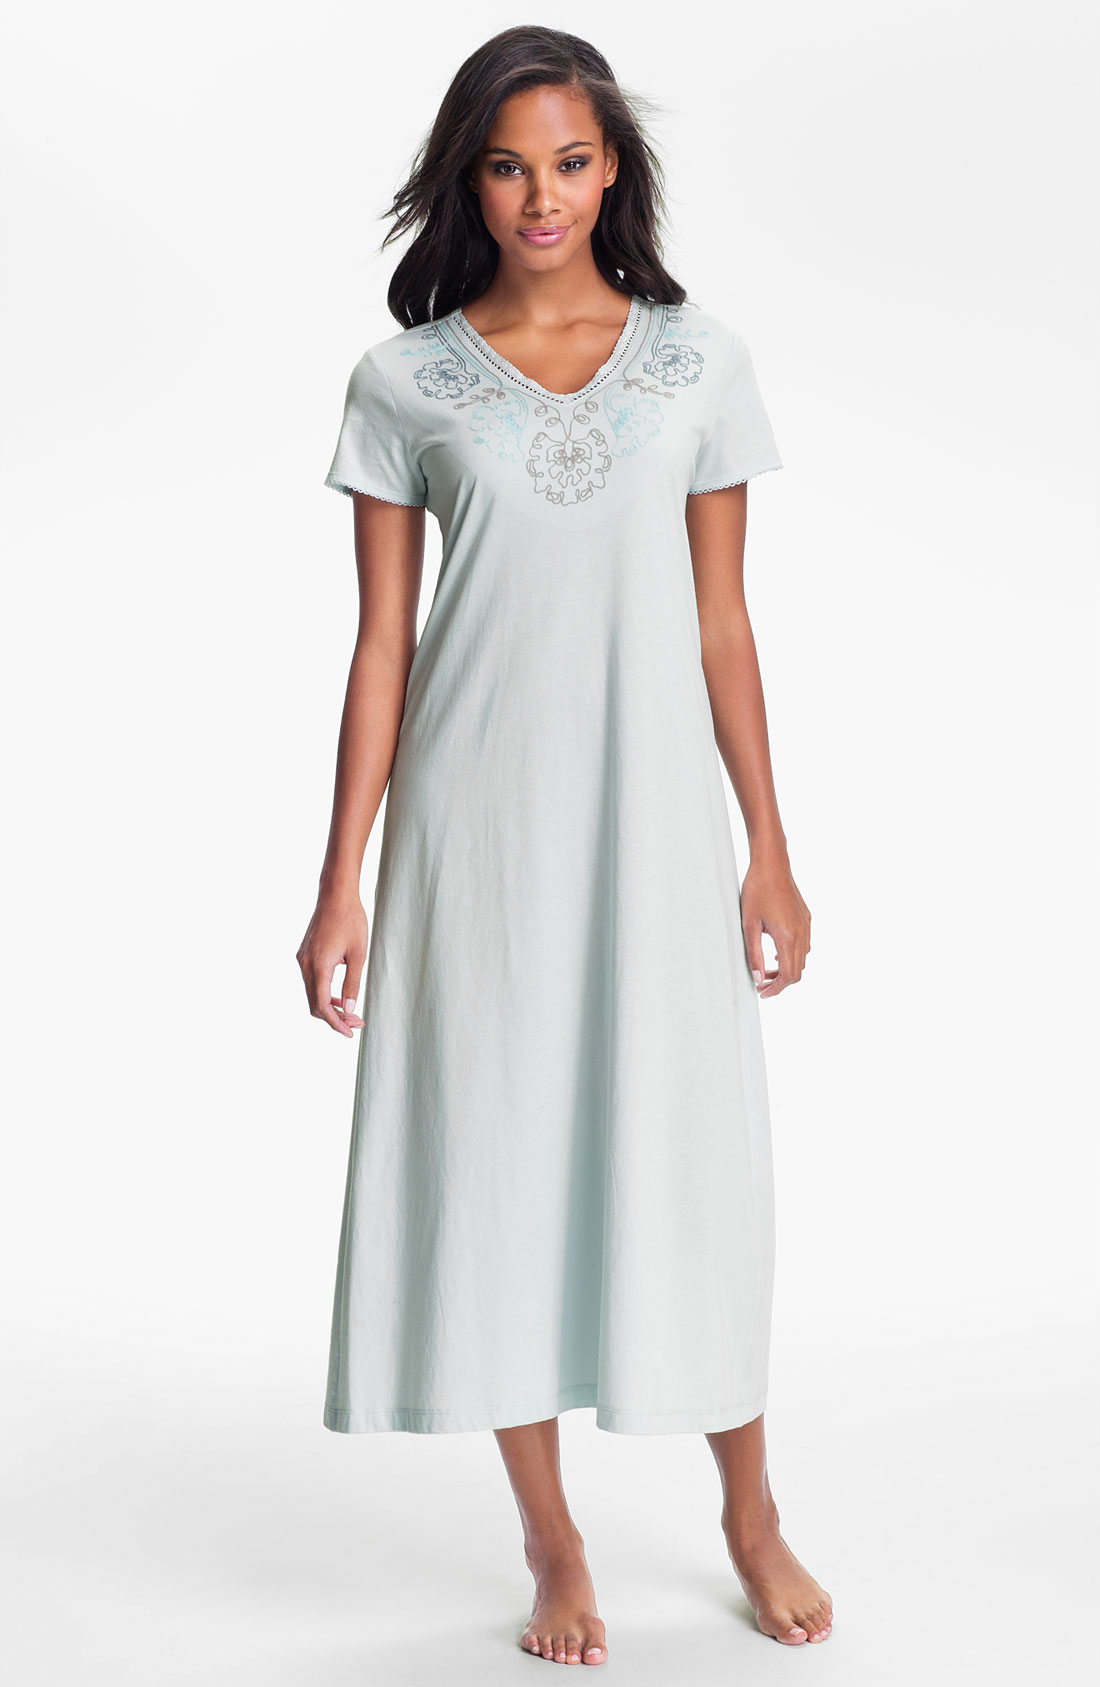 Carole Hochman Designs Airbrushed Stencil Nightgown in (bleached blue ...